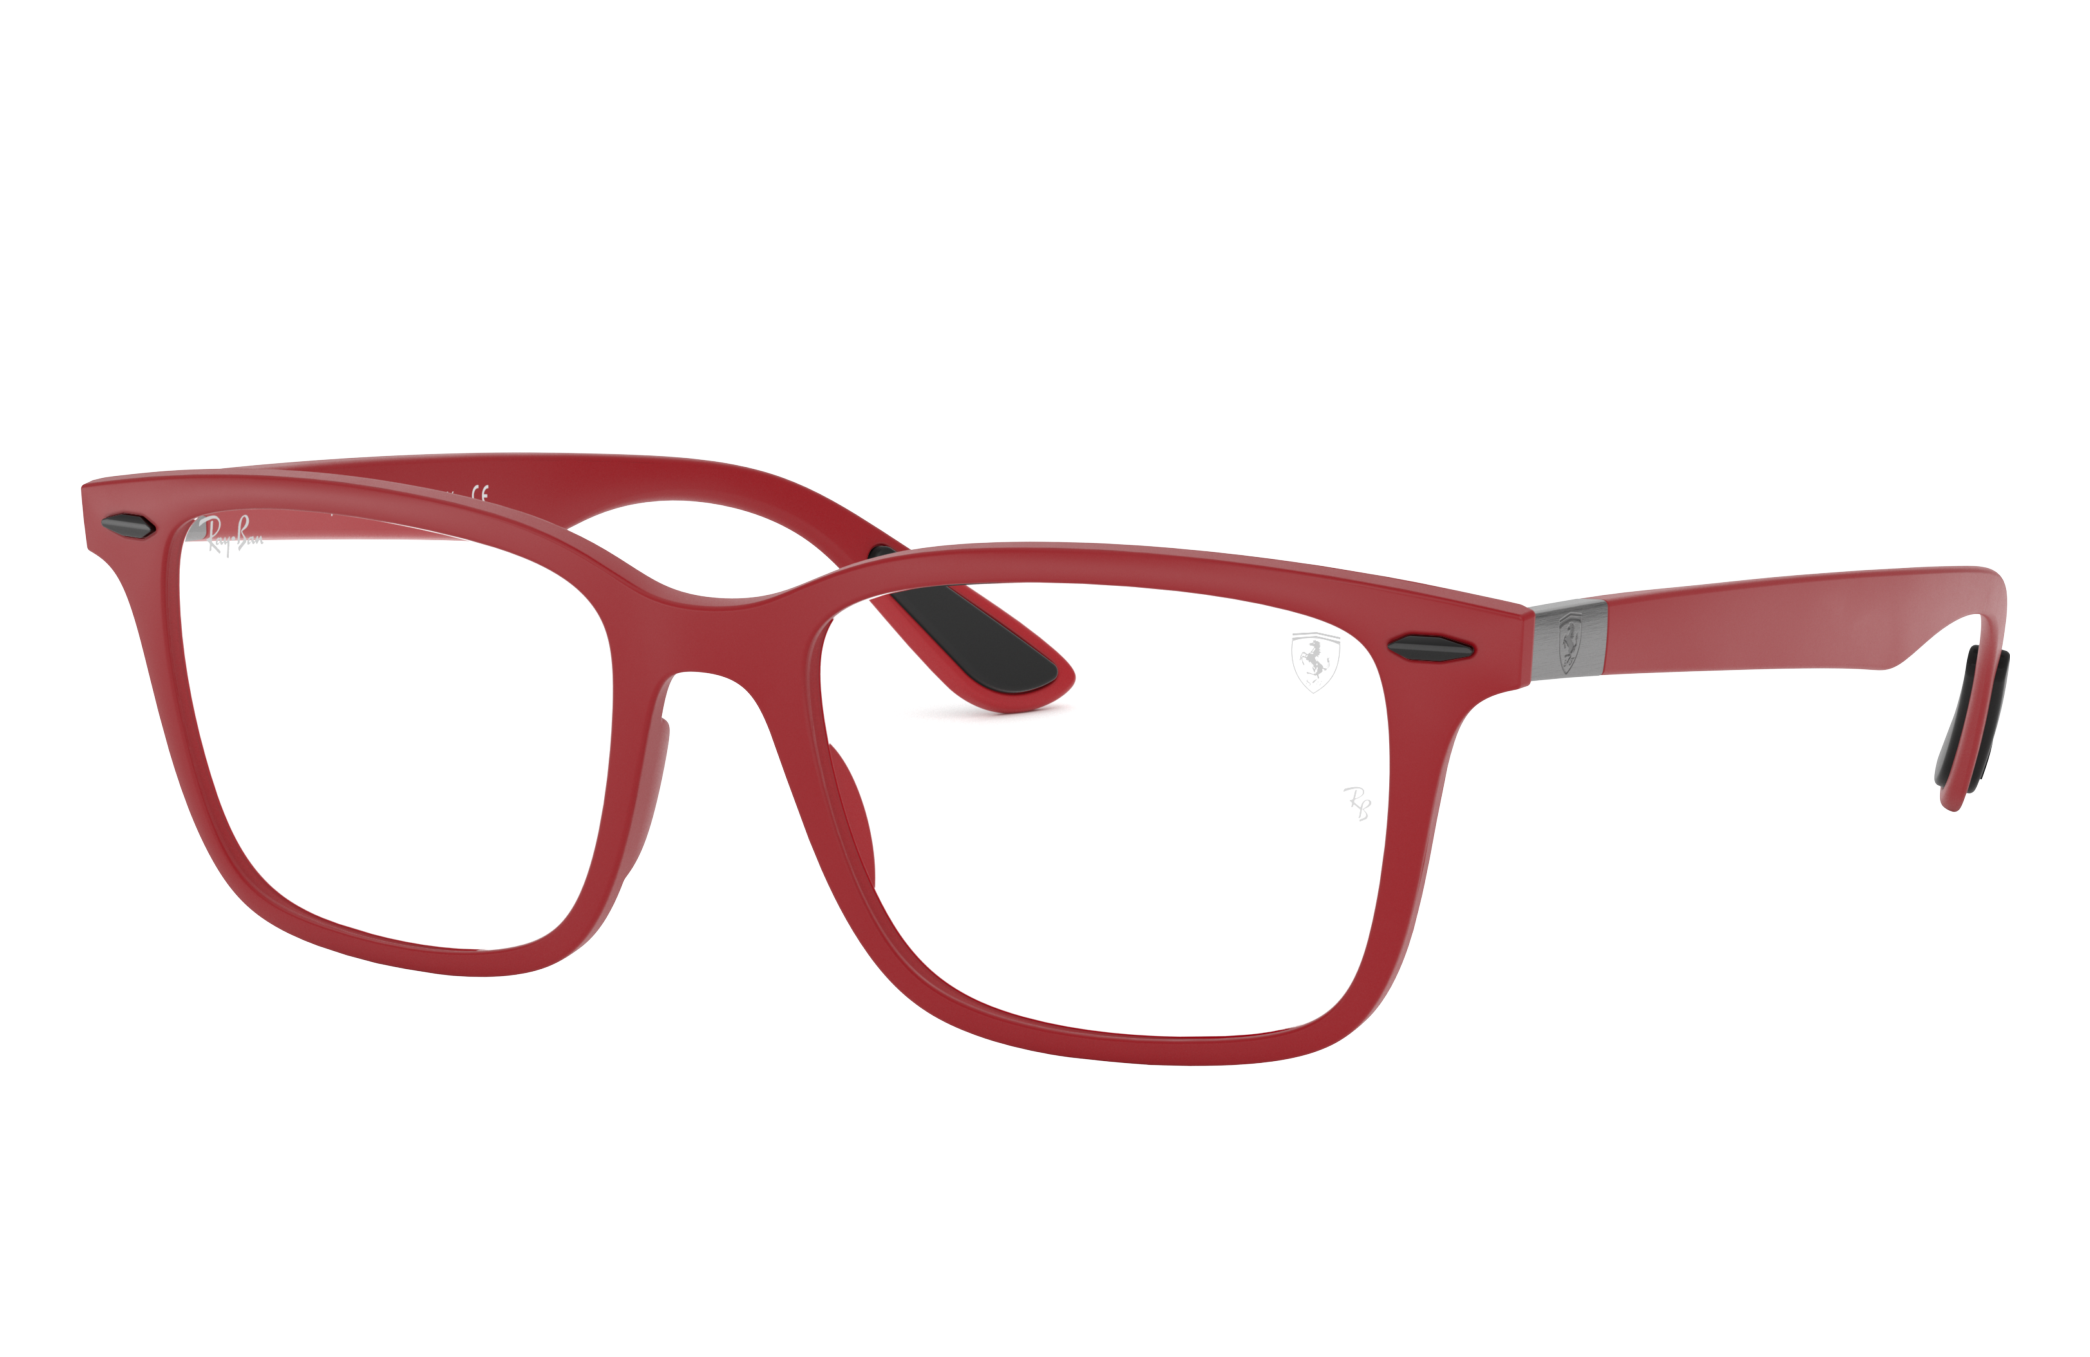 Rb7144m Scuderia Ferrari Collection Eyeglasses with Red Frame | Ray-Ban®